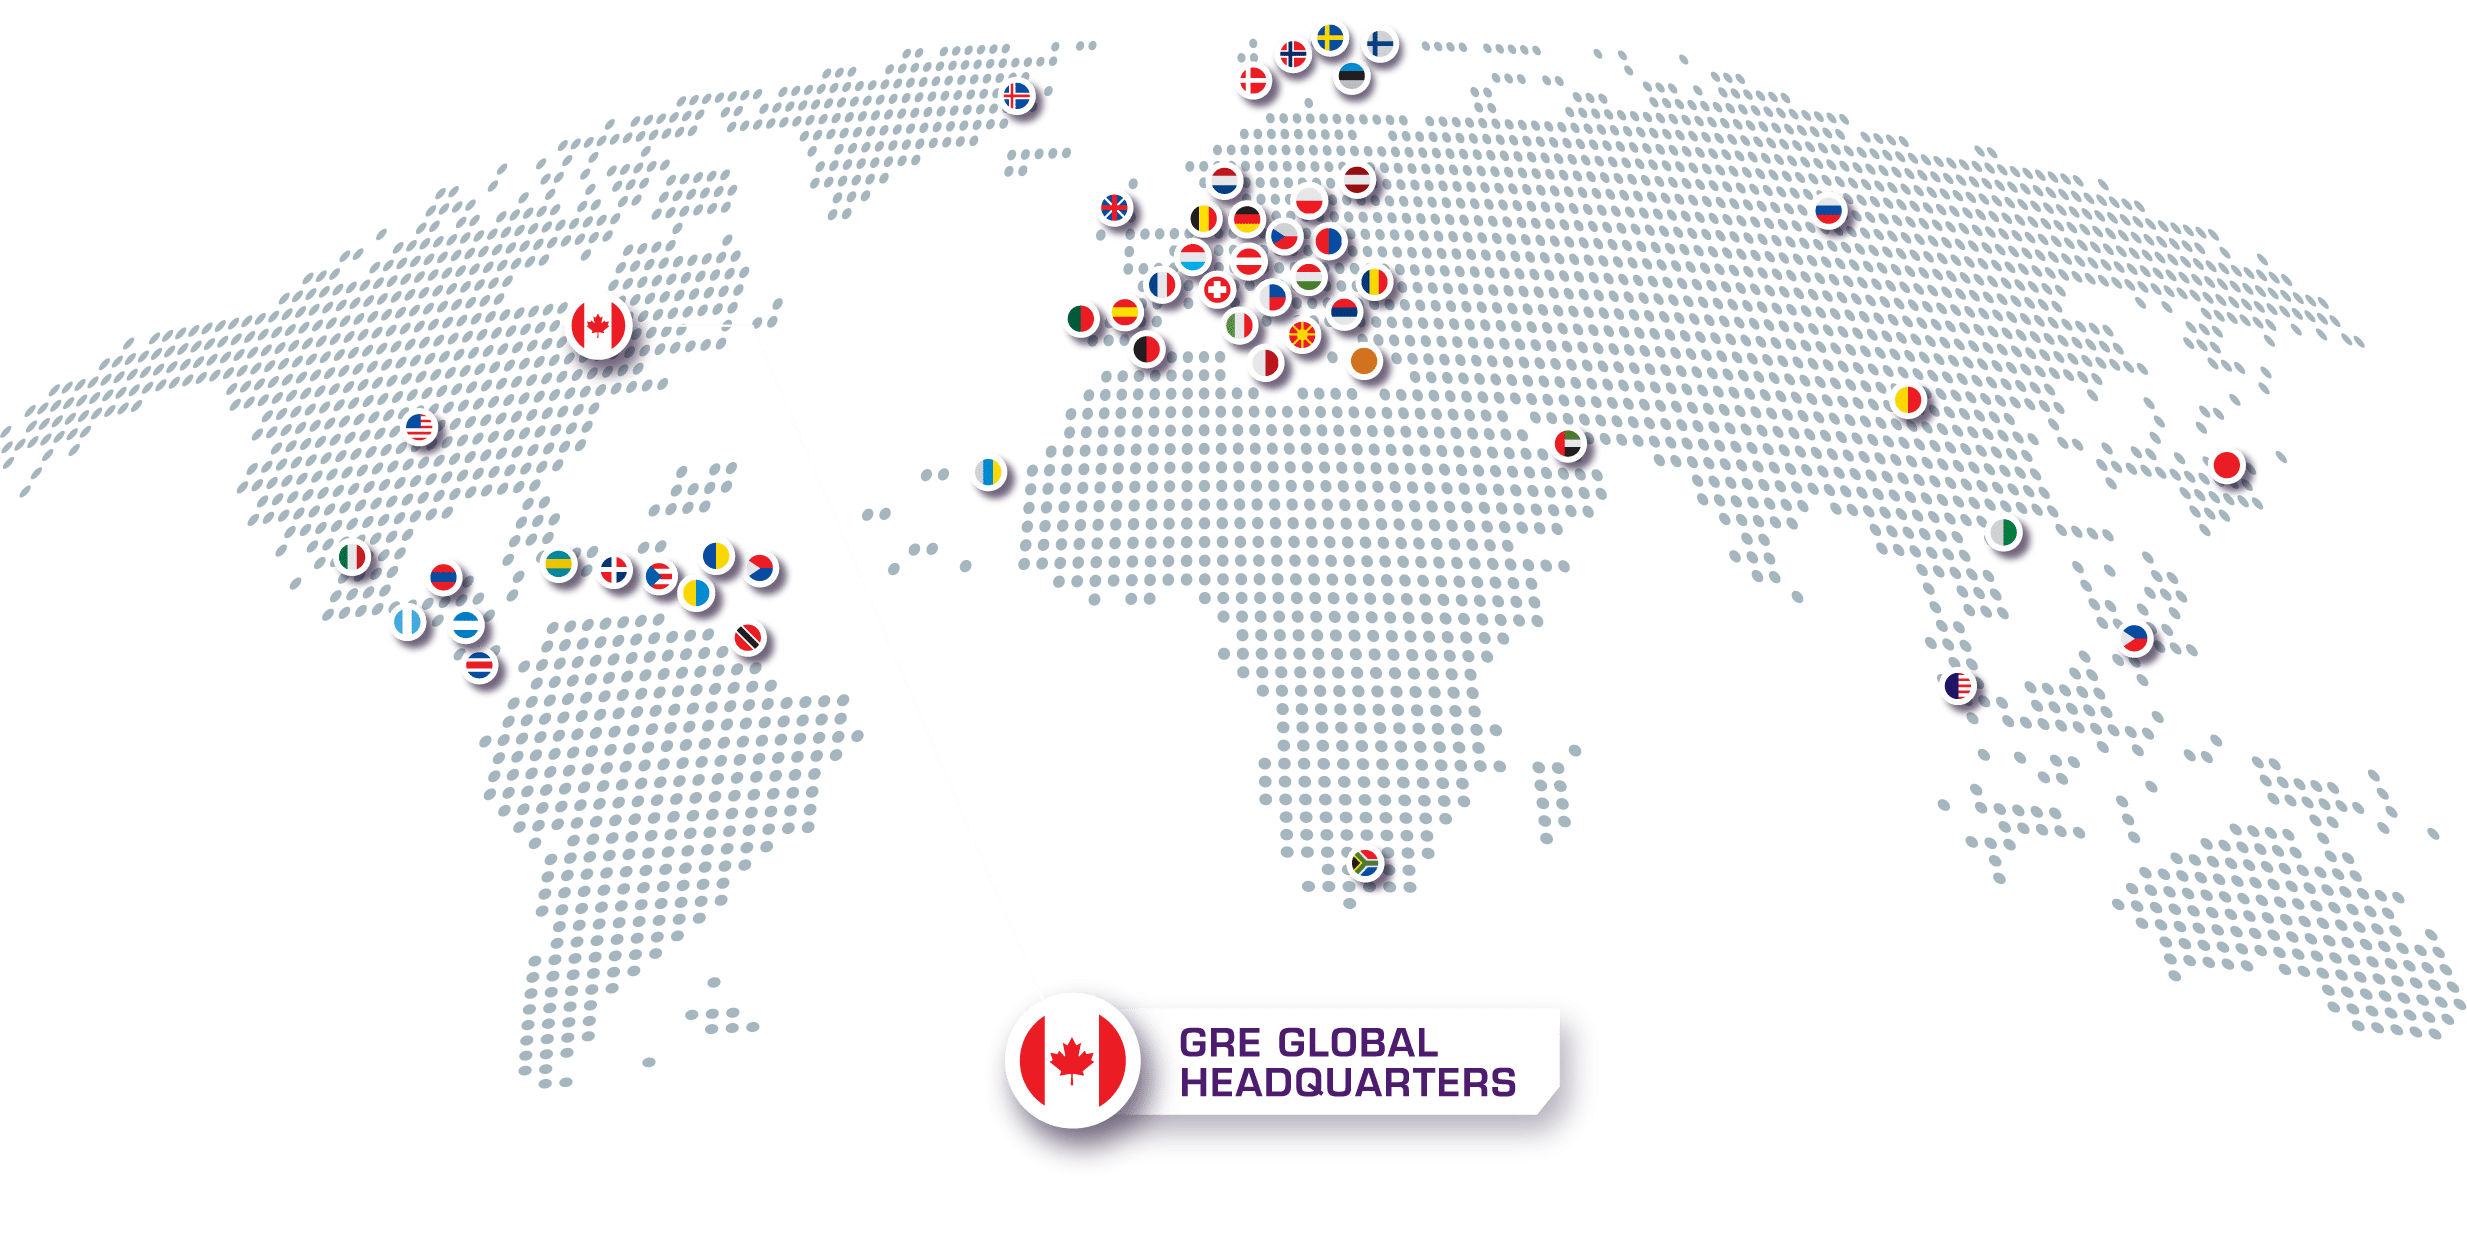 Map of the world with various countries highlighted showing where GRE distribution is, and where the Canadian headquarters are located